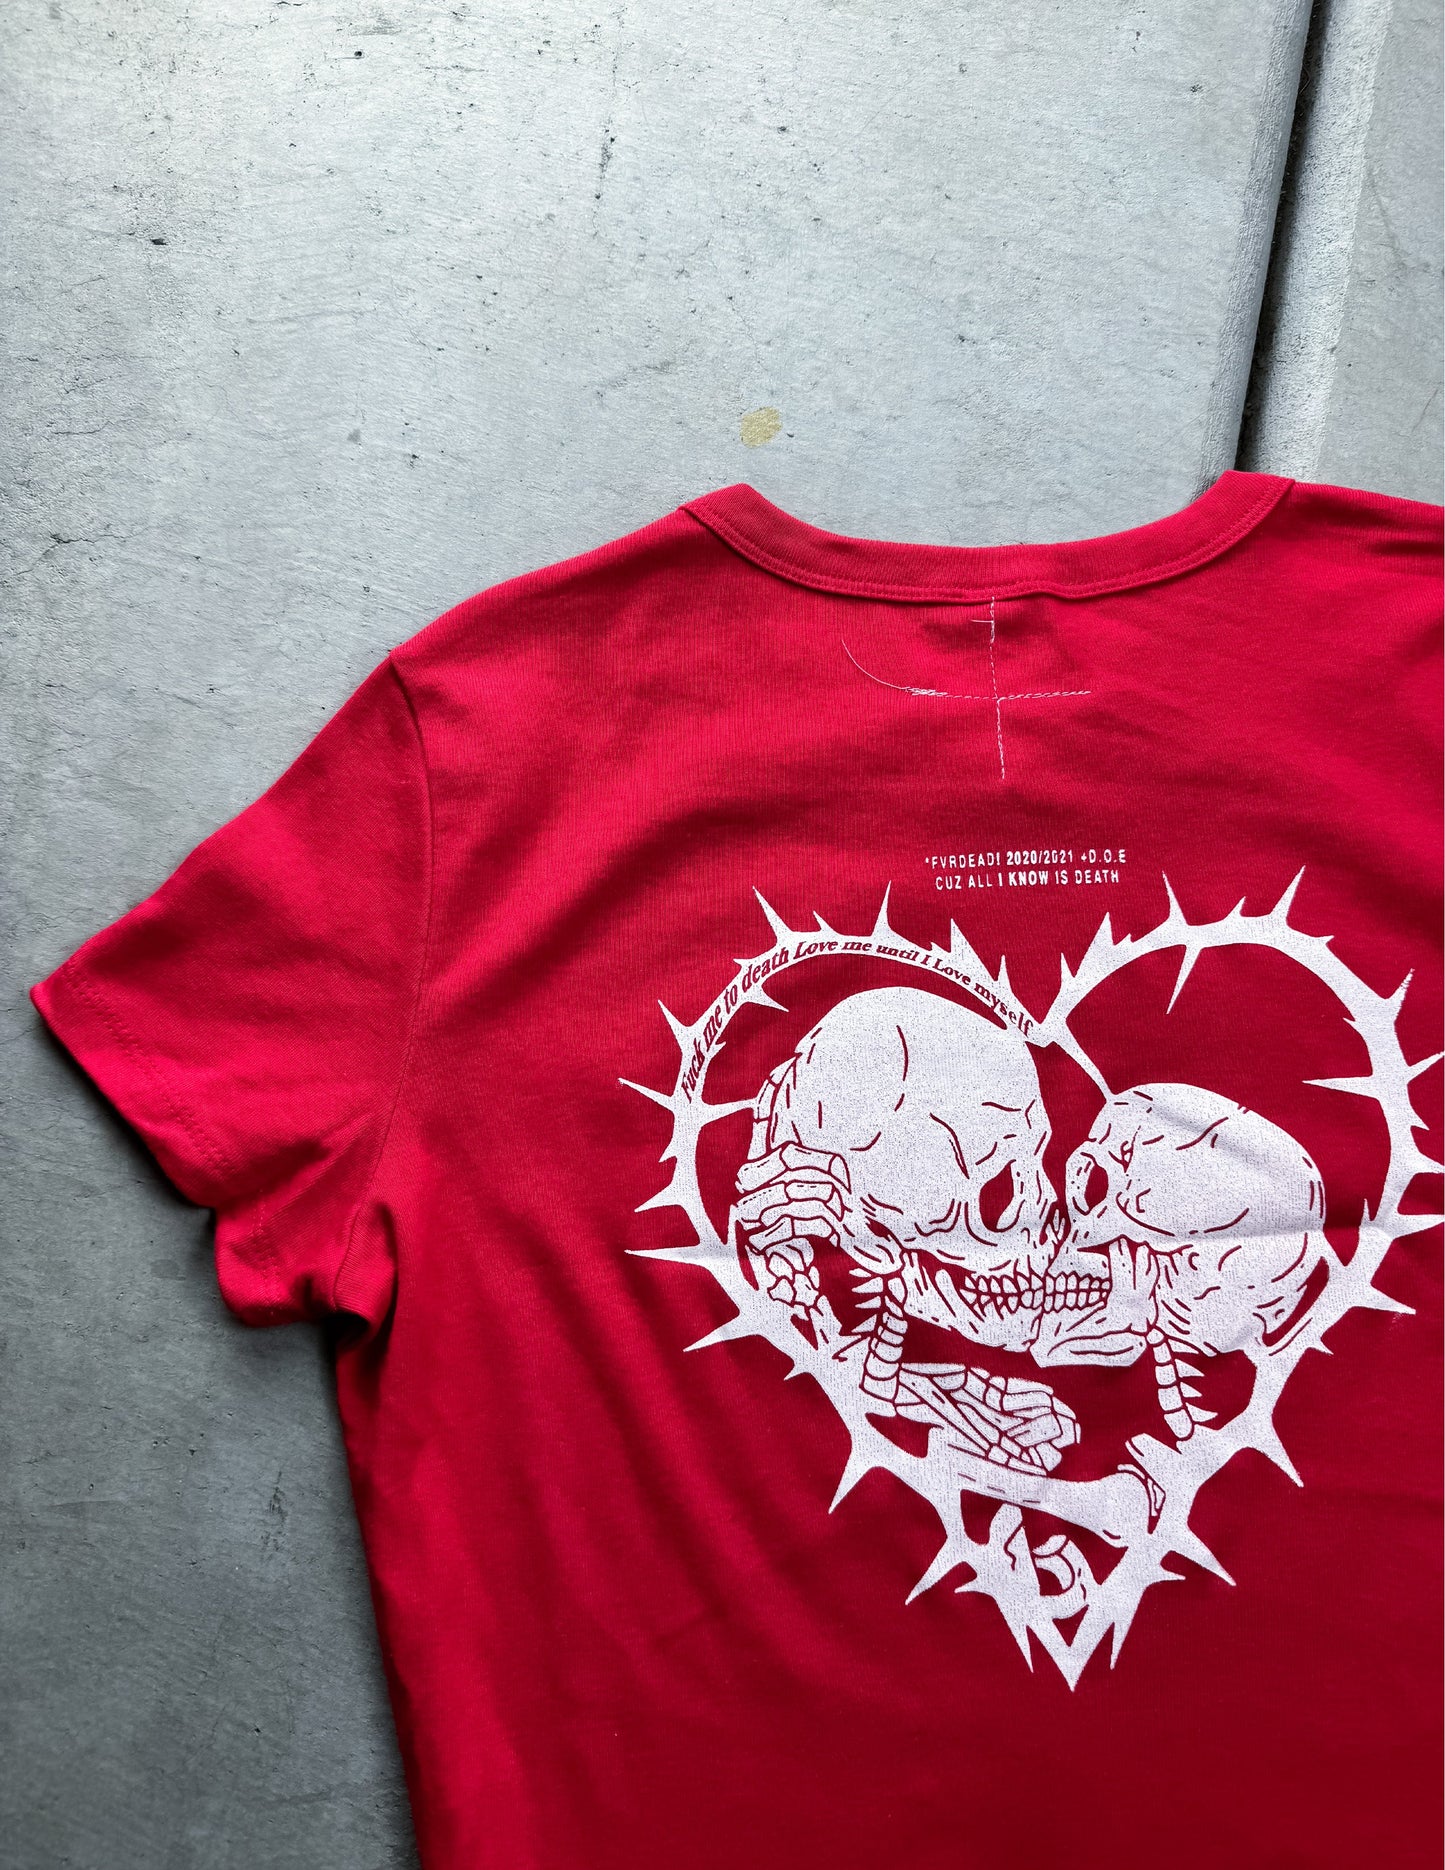 F*ck me to death red baby tee